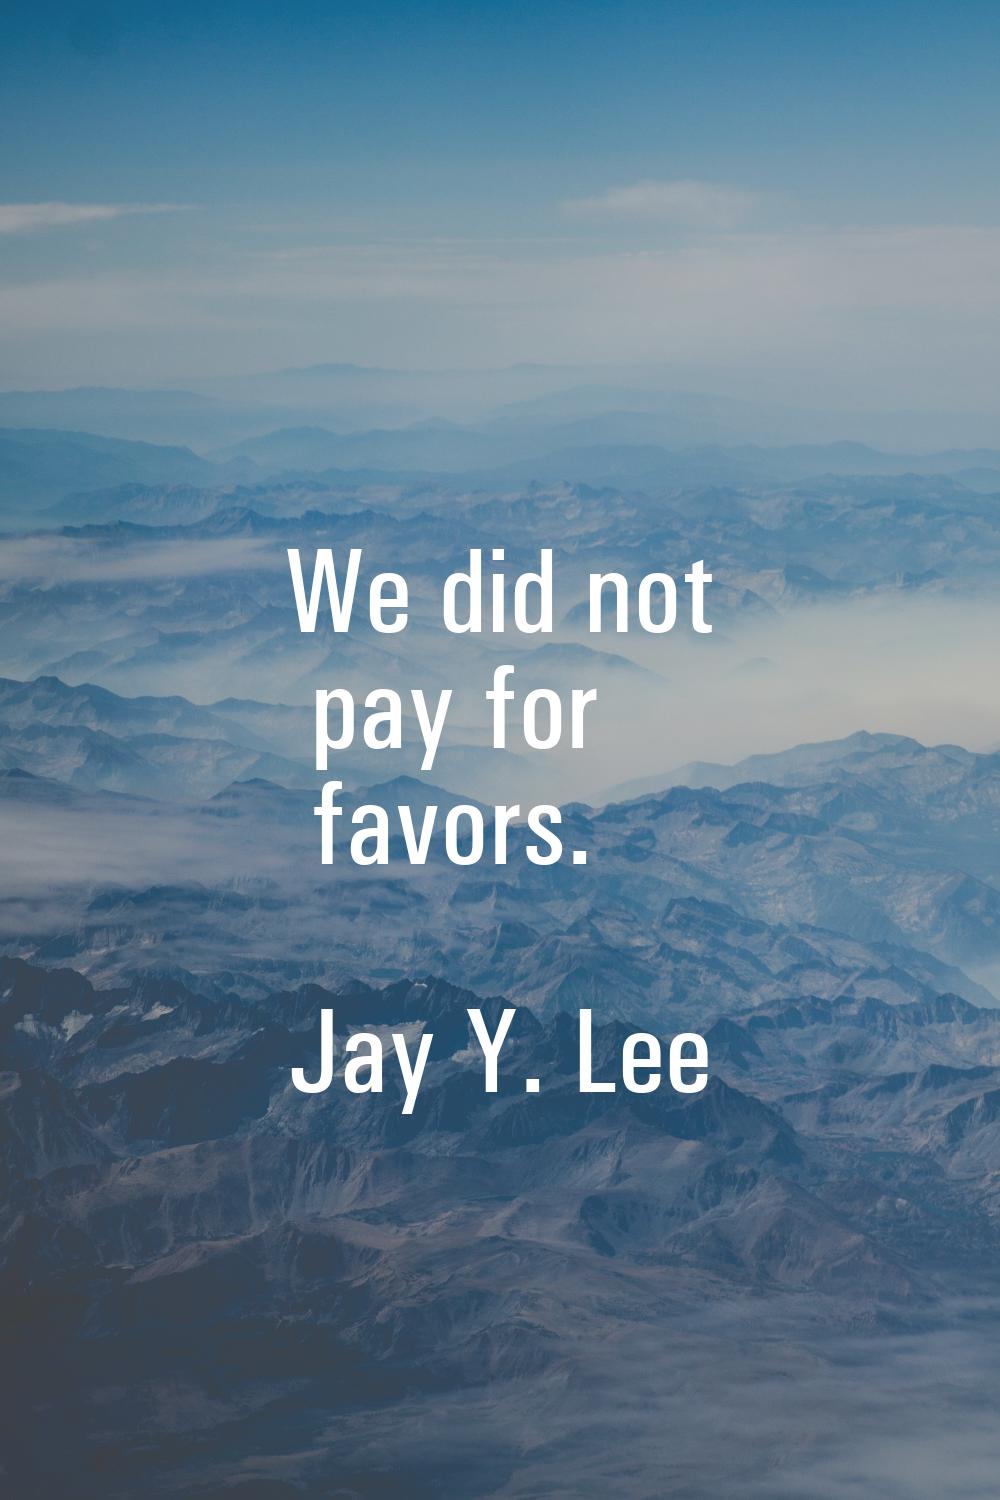 We did not pay for favors.